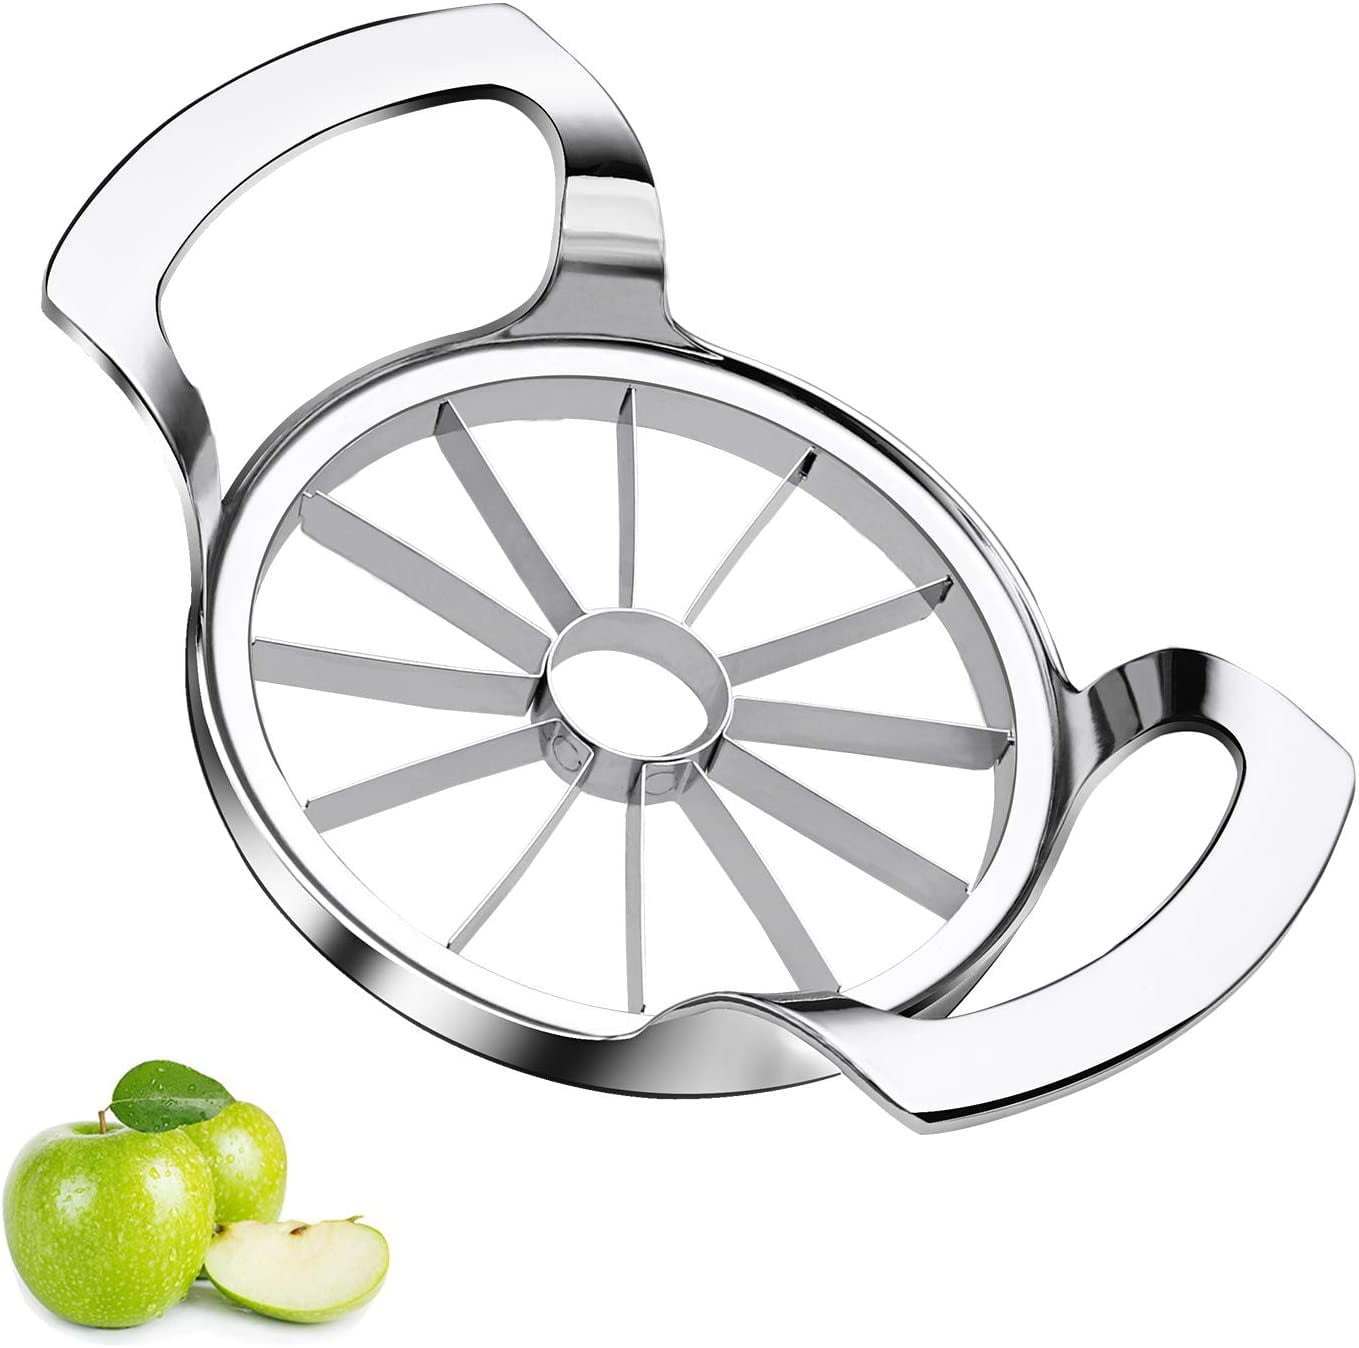 3 in 1 Peeler Slicer Corer with Stainless Steel and Strong Heavy Suction Base for Apple Potato Pear,2 Extra Blades 10 pcs Forks Apple Peeler Blue 